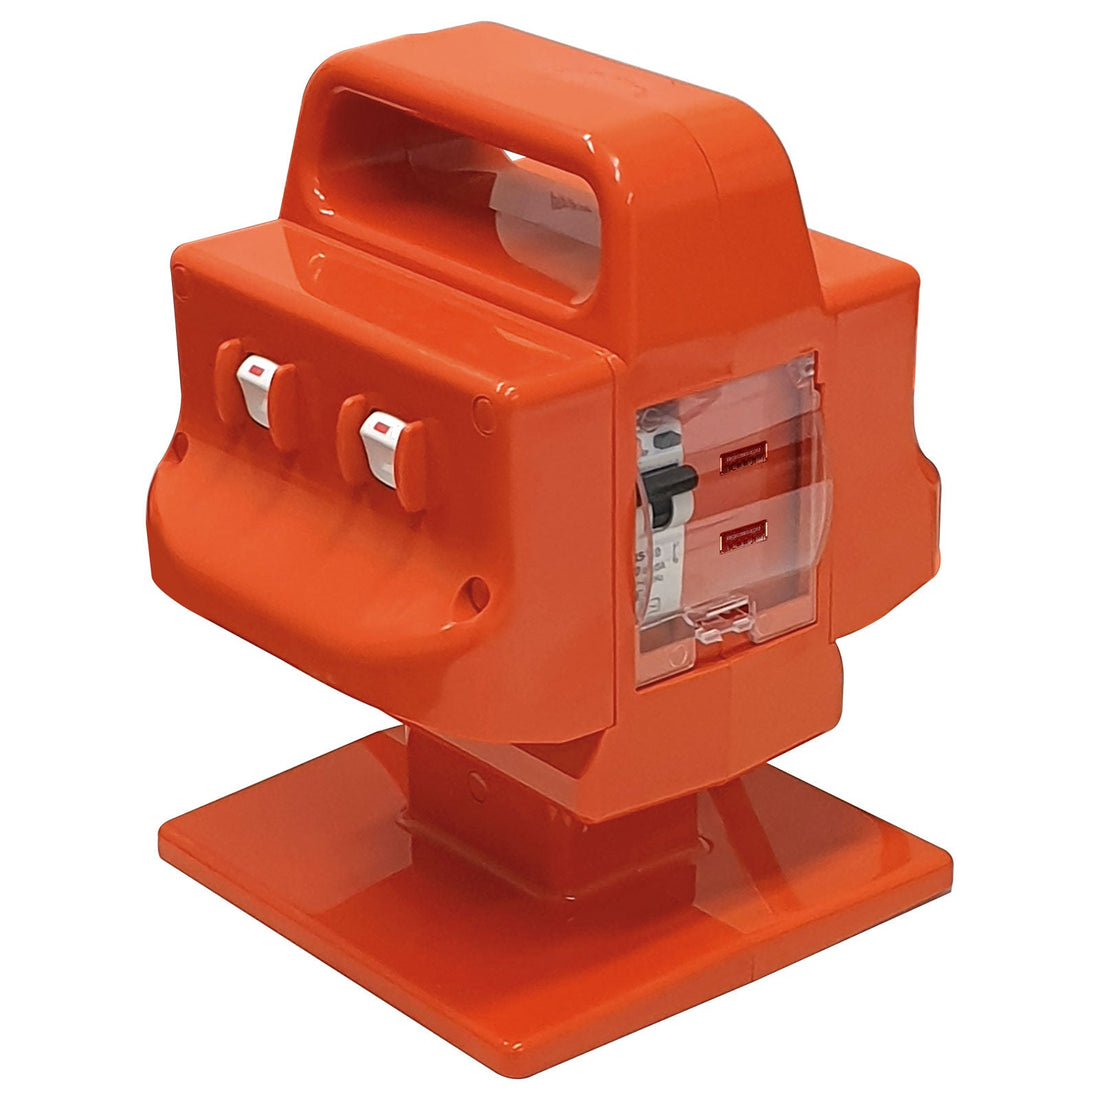 Trodos 4 Outlet RCD Power Block with USB Charger Mercator